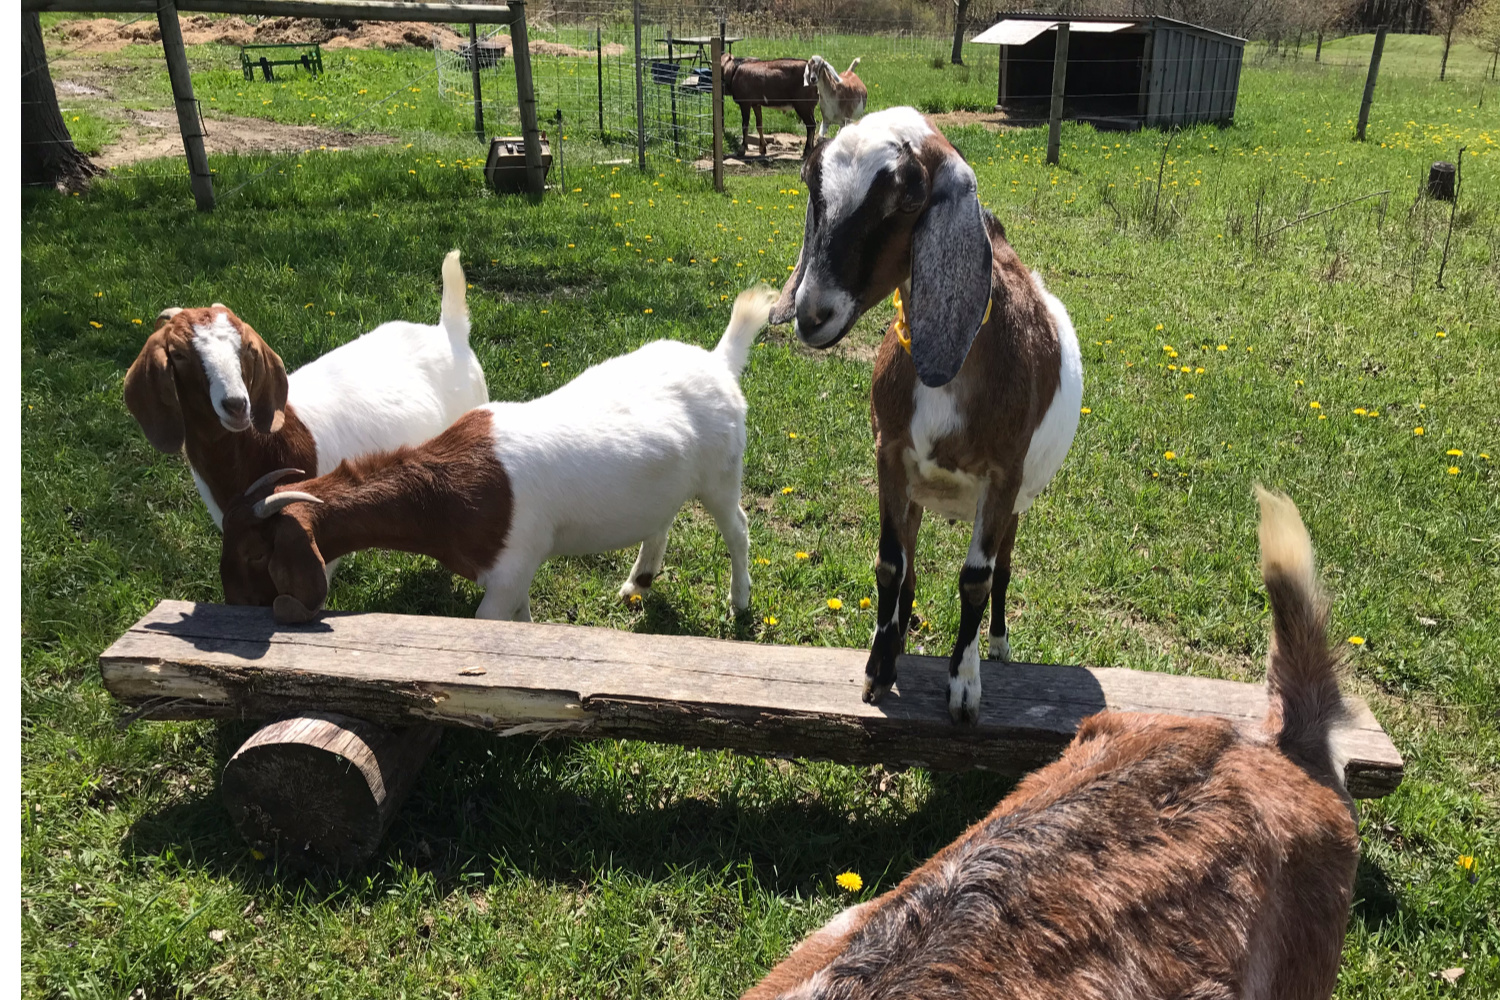 goats playing on a small log bench in a pasture